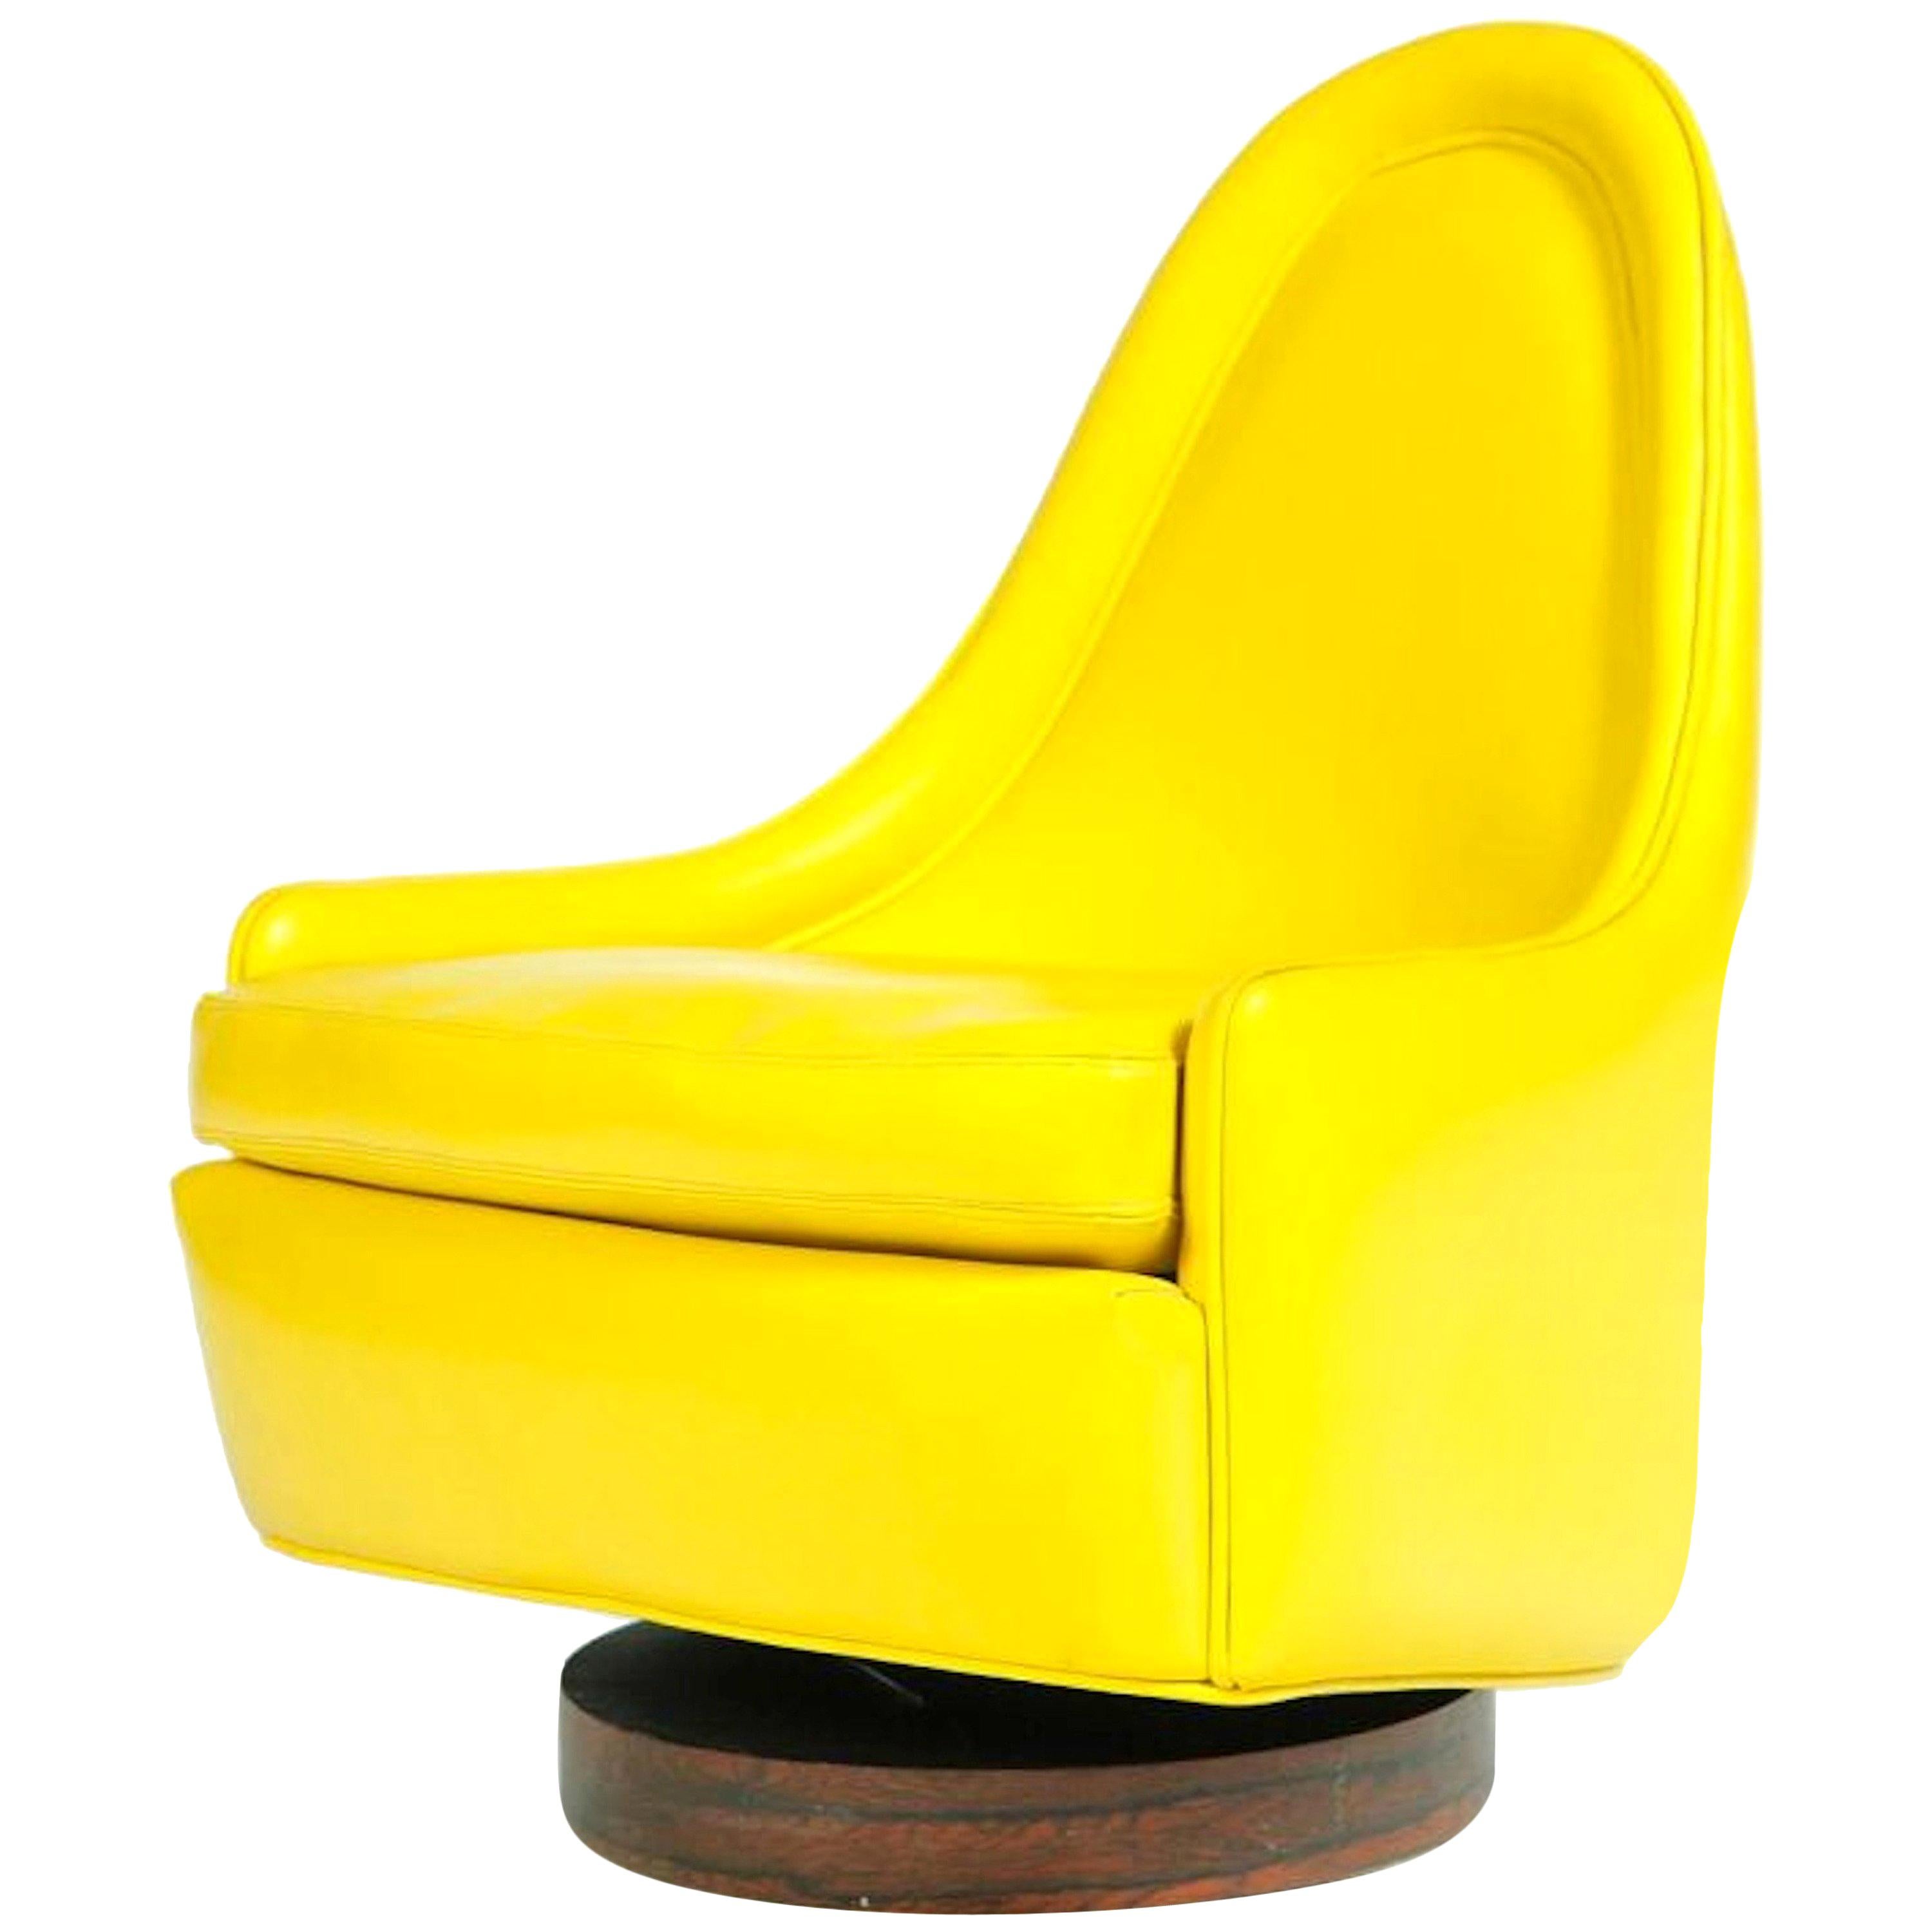 Milo Baughman Swiveling Lounge Chair, Yellow, Rosewood, Signed